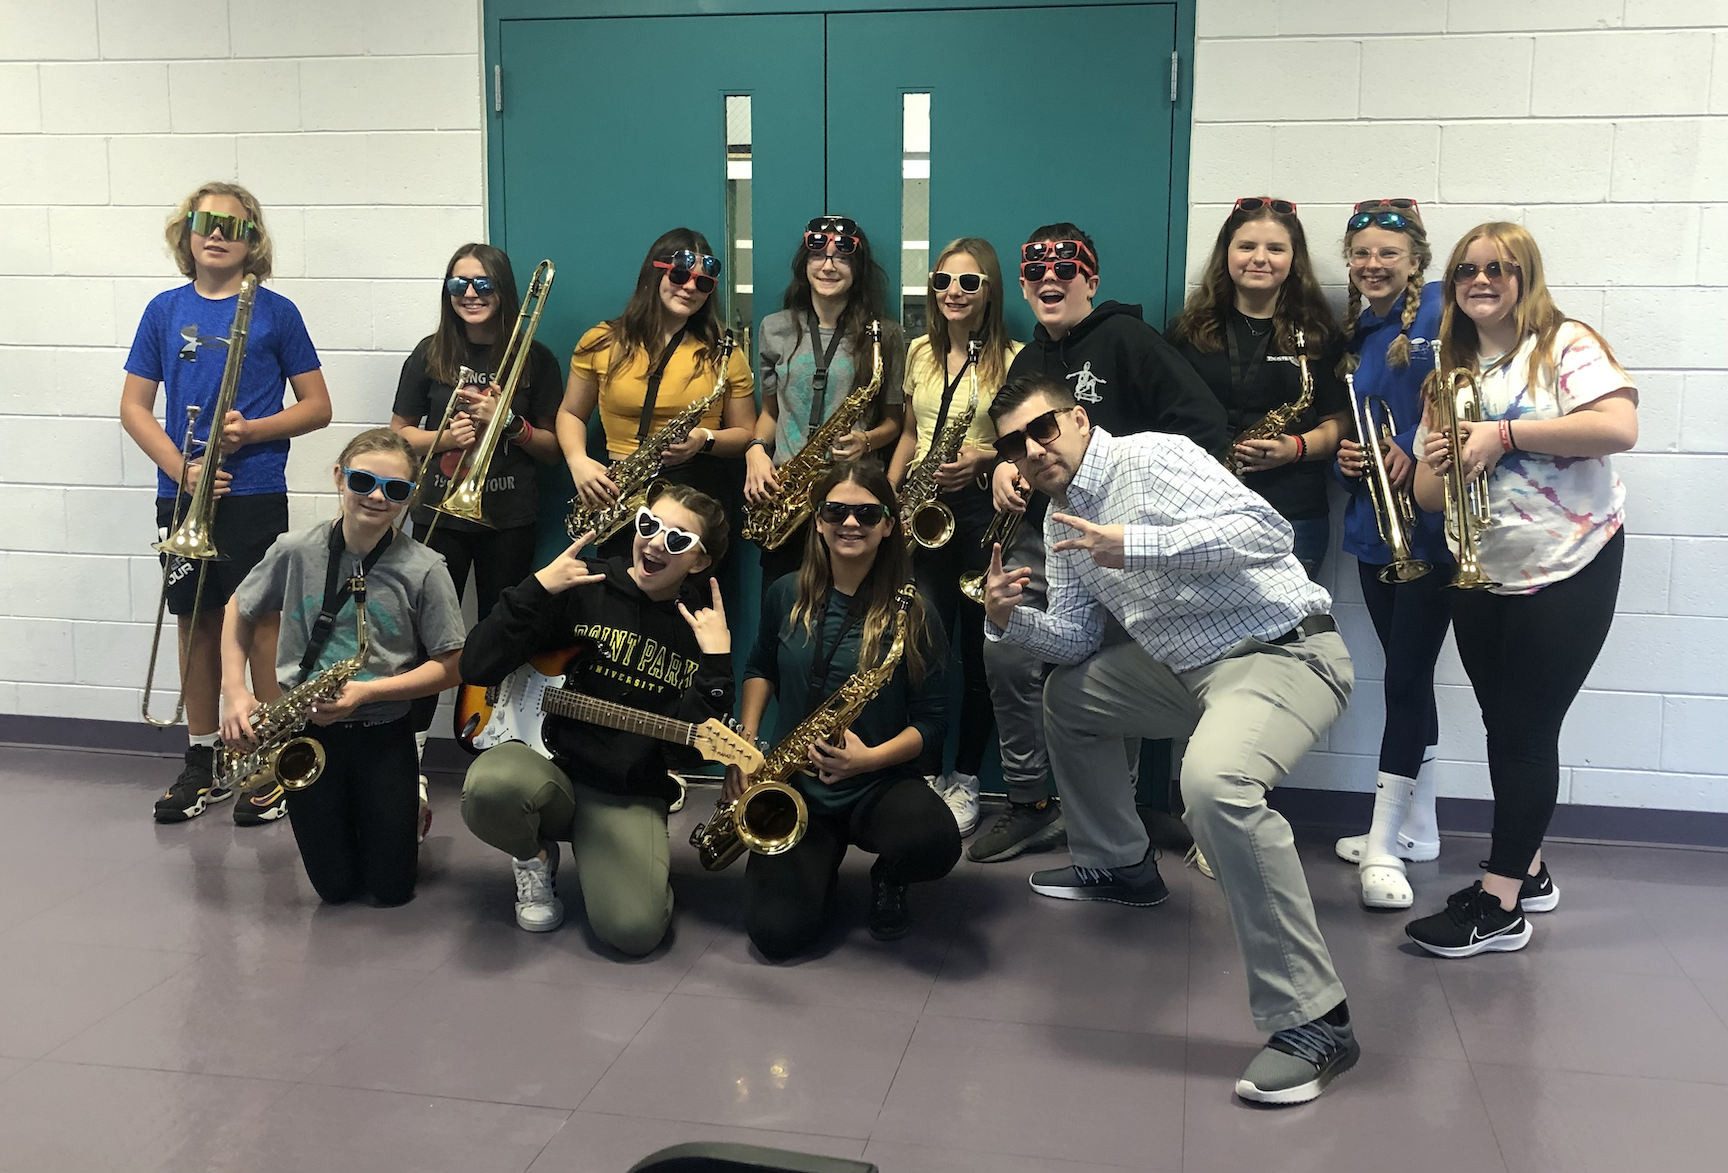 Mr. Pyles and his 7th-grade band students “Shade out drugs” at Penn Middle School